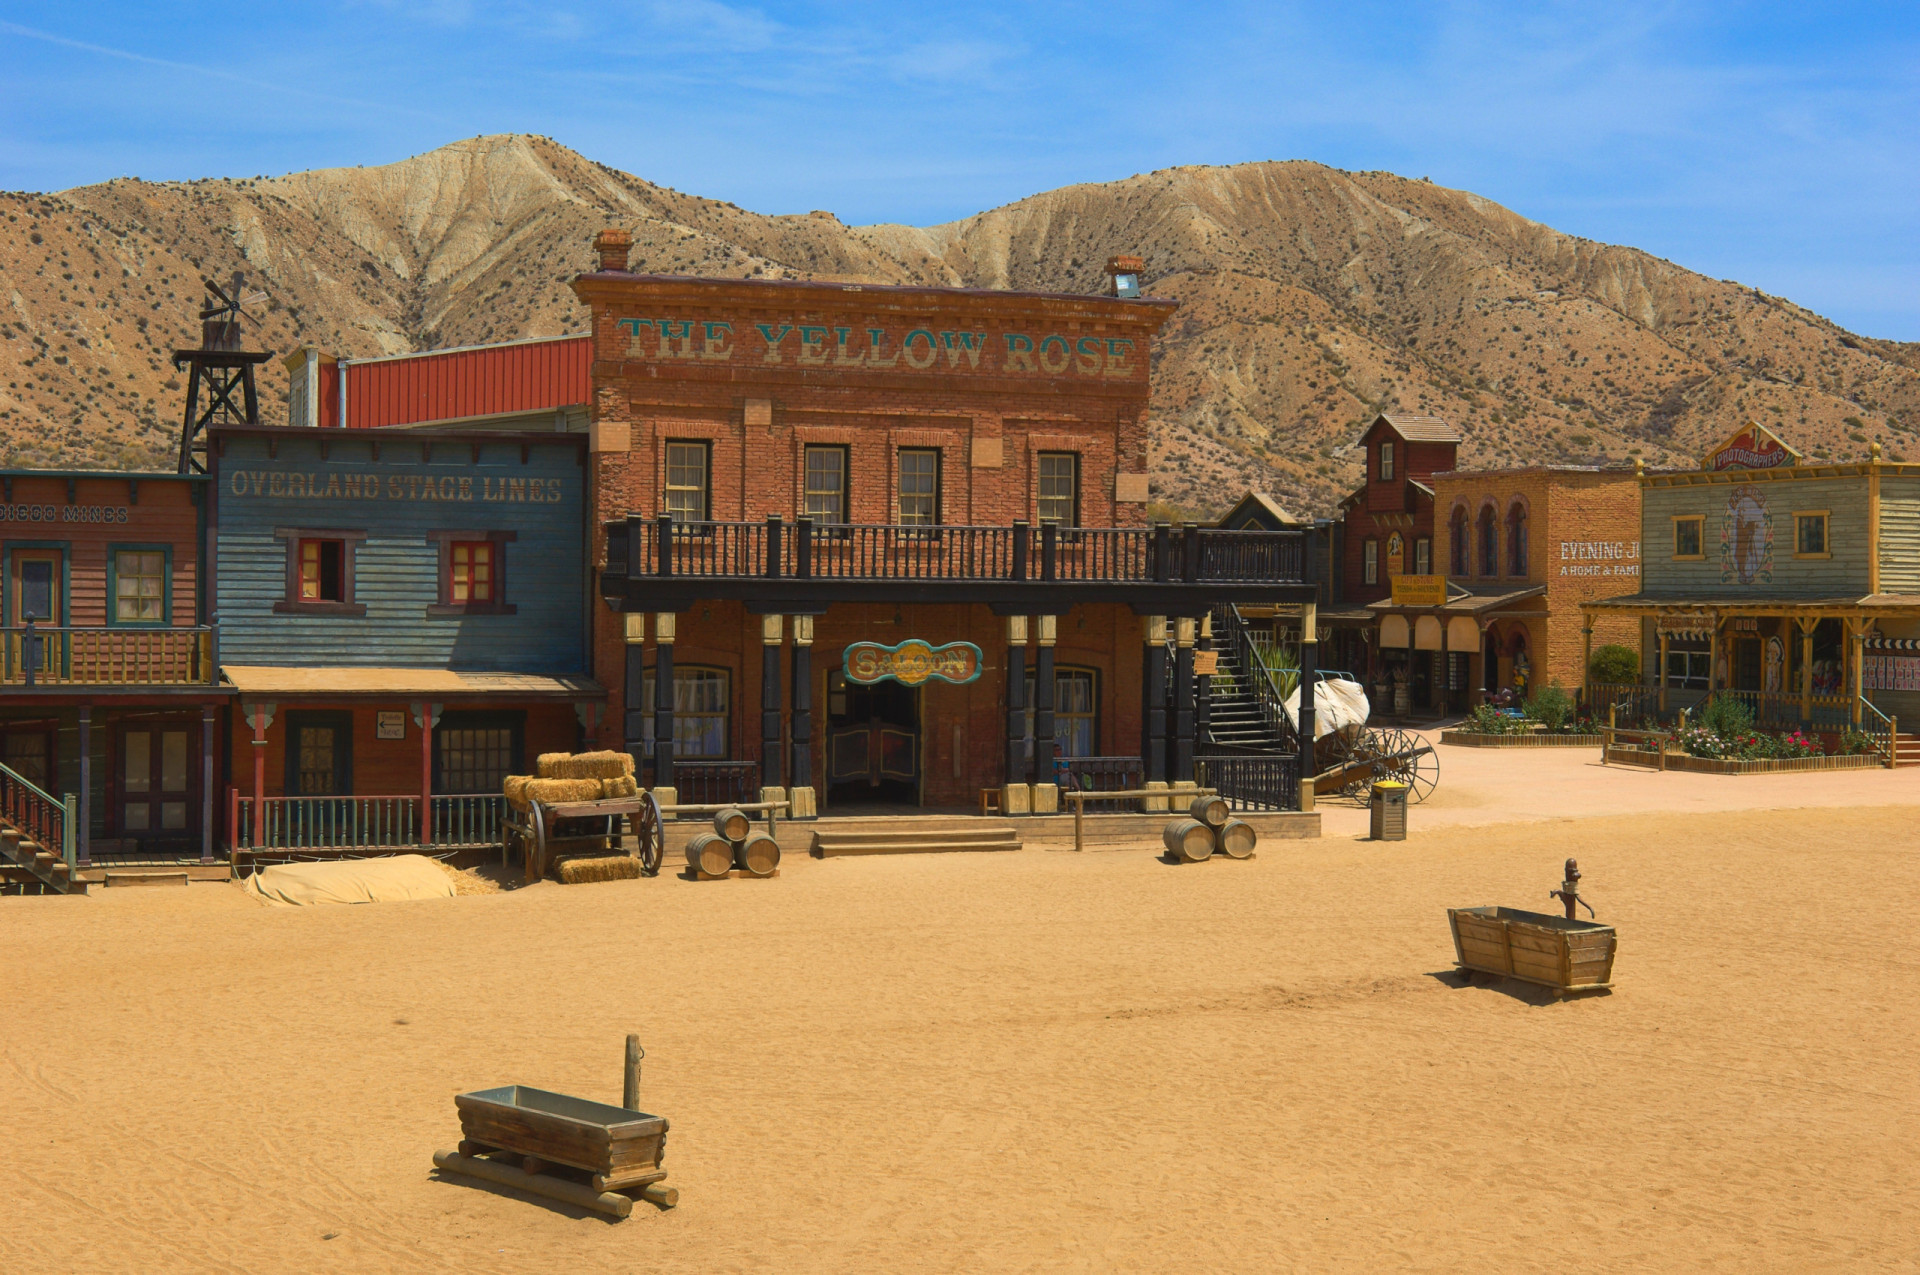 <p>Also known as Oasys, Mini Hollywood is located near the town of Tabernas. It's a Spanish Western-styled theme park originally created as a movie set for one of the most influential Westerns ever made. Can you guess the name of the film?</p><p>You may also like:<a href="https://www.starsinsider.com/n/412635?utm_source=msn.com&utm_medium=display&utm_campaign=referral_description&utm_content=570754en-en"> Actors who have songs named after them</a></p>